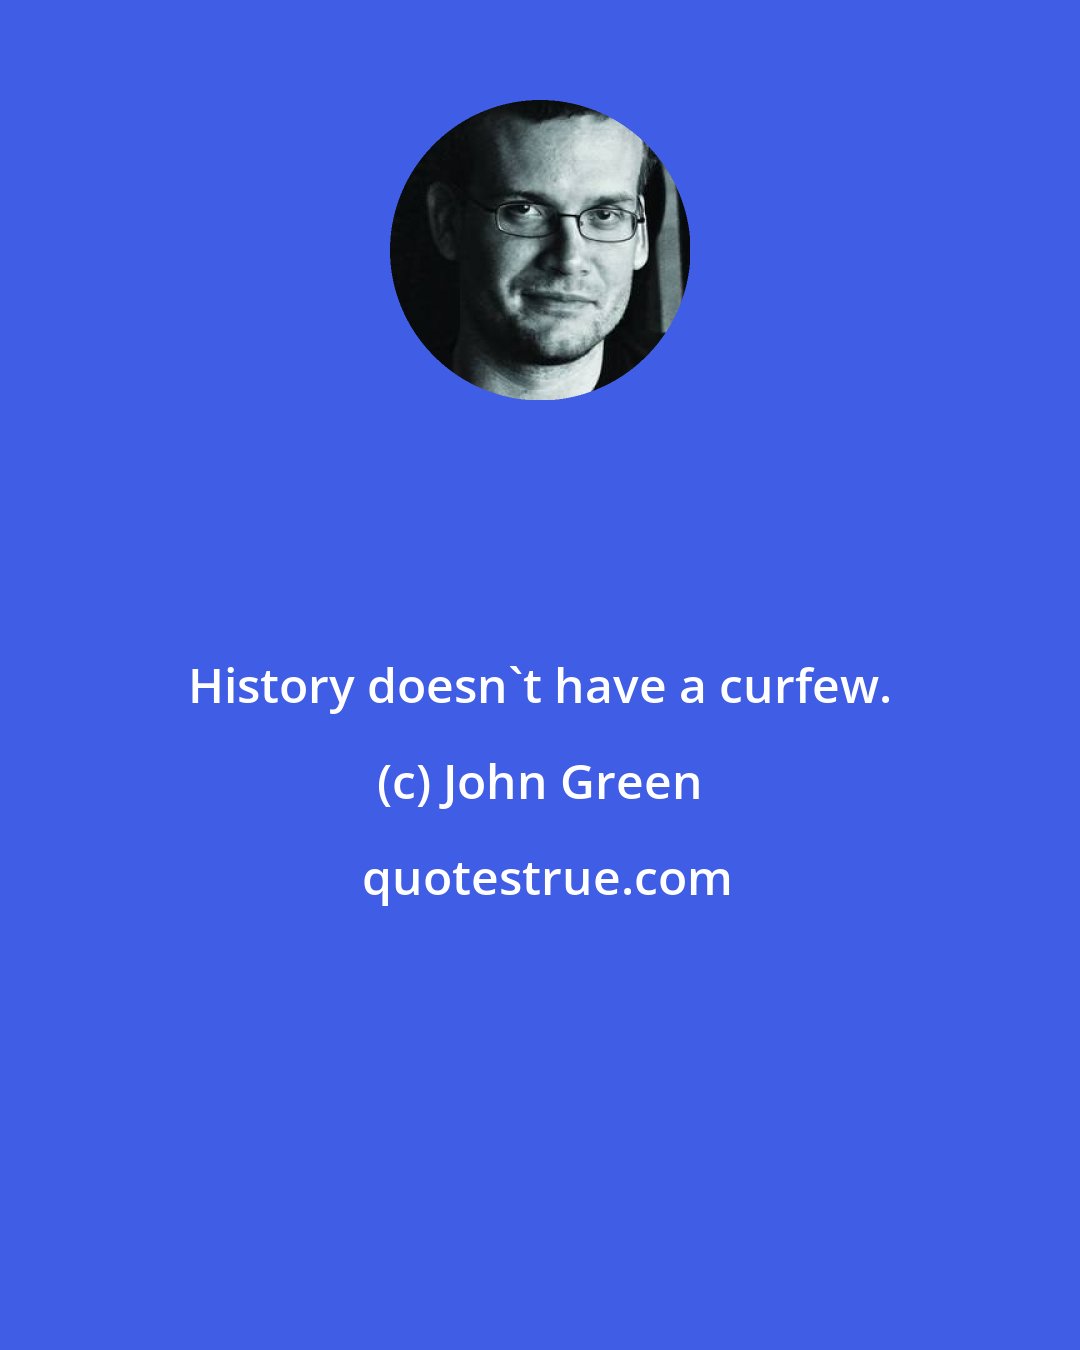 John Green: History doesn't have a curfew.